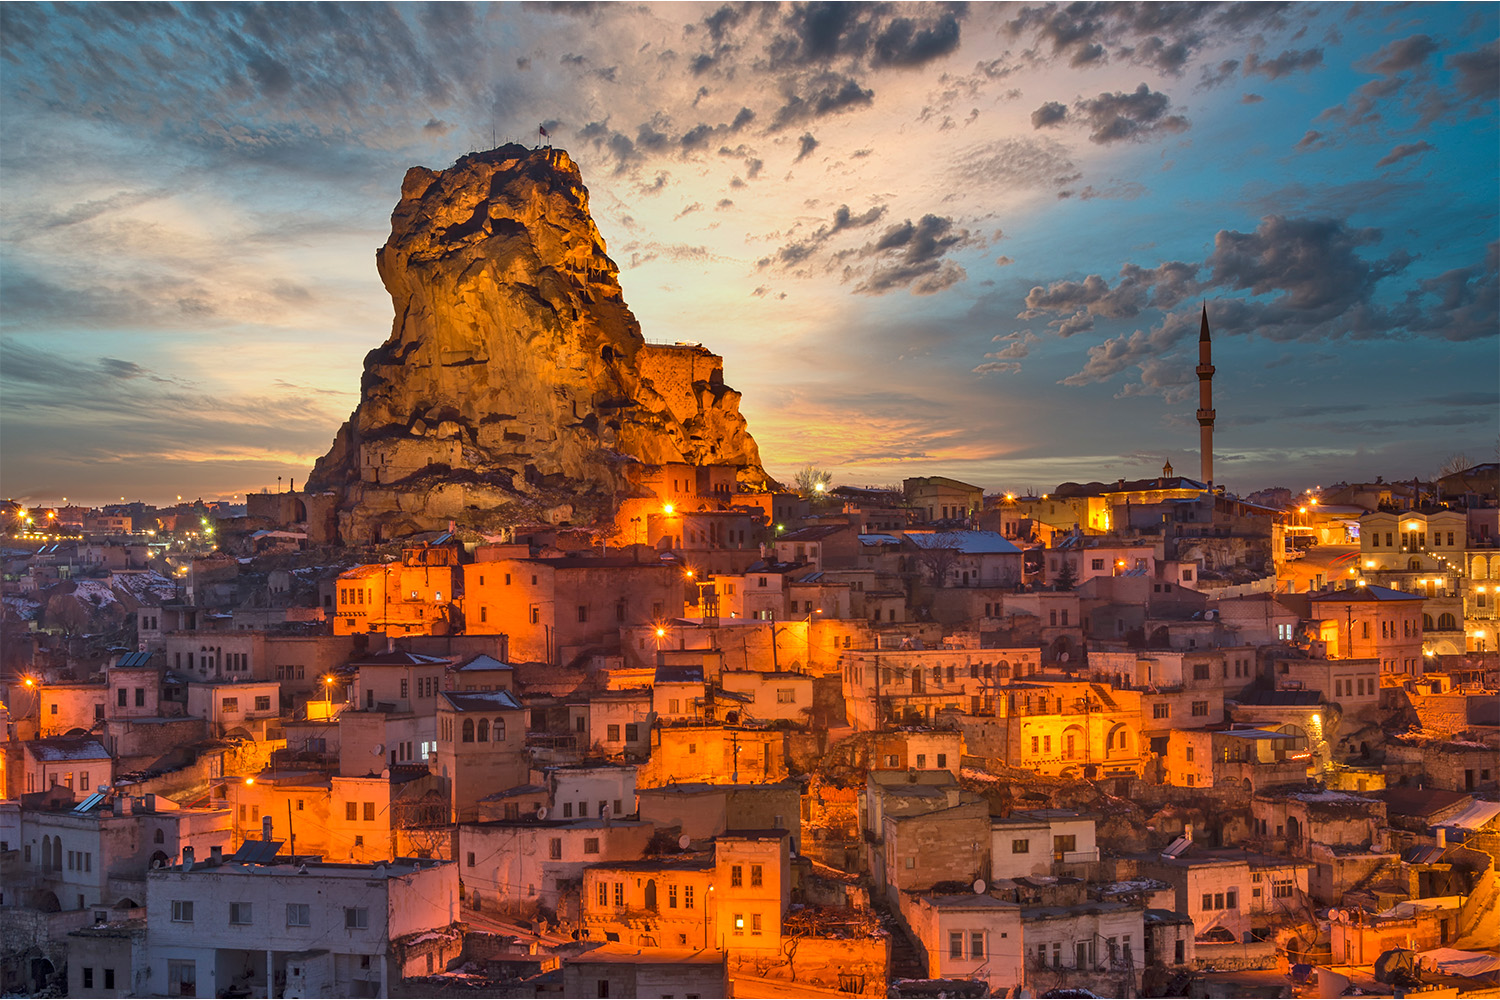 Sunset over Ortahisar village and fortress in Cappadocia.